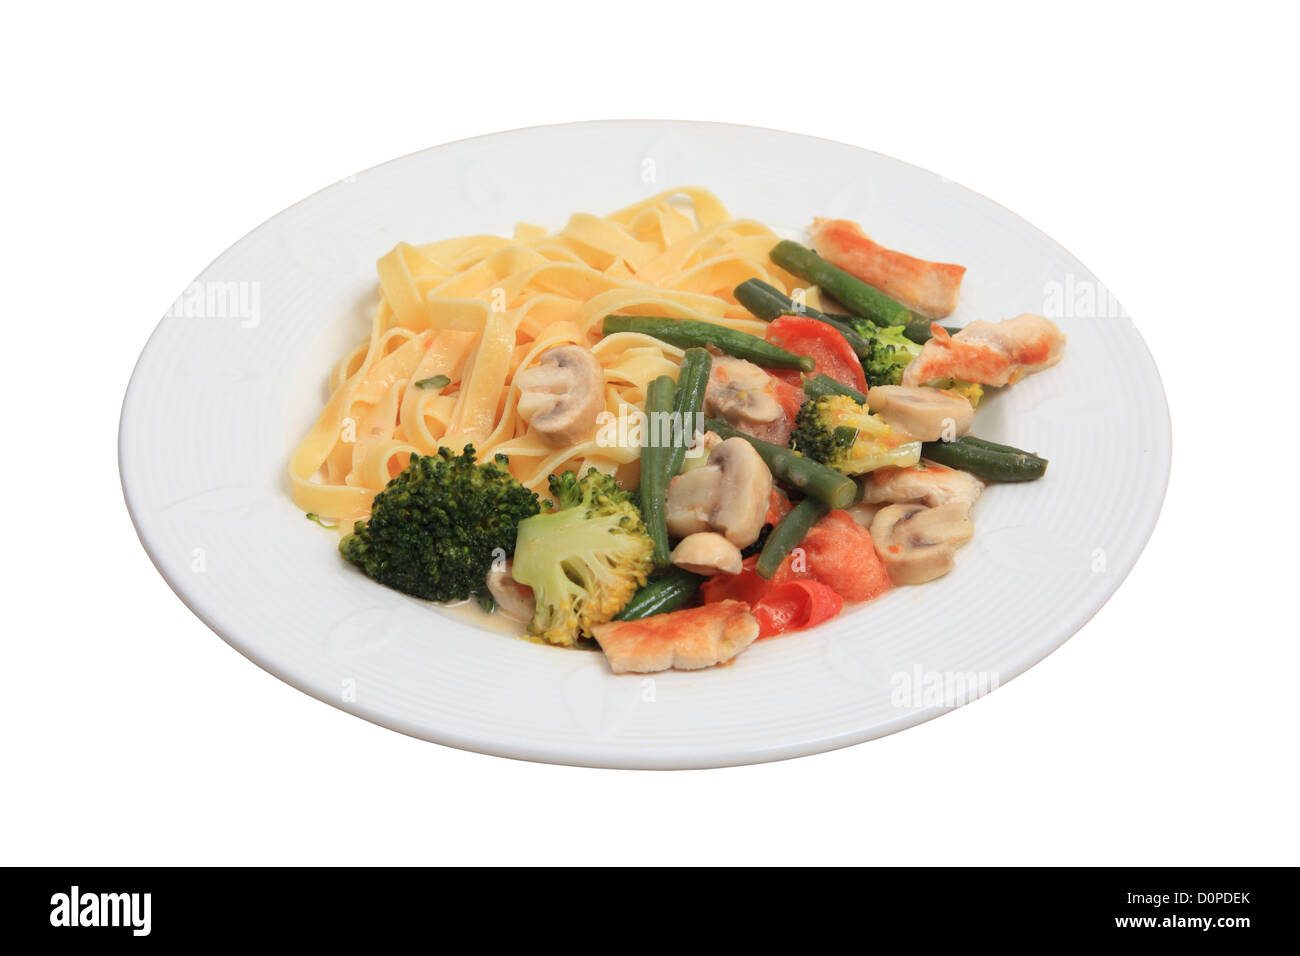 Healthy pasta dish with broccoli, mushrooms, chicken and string beans Stock Photo